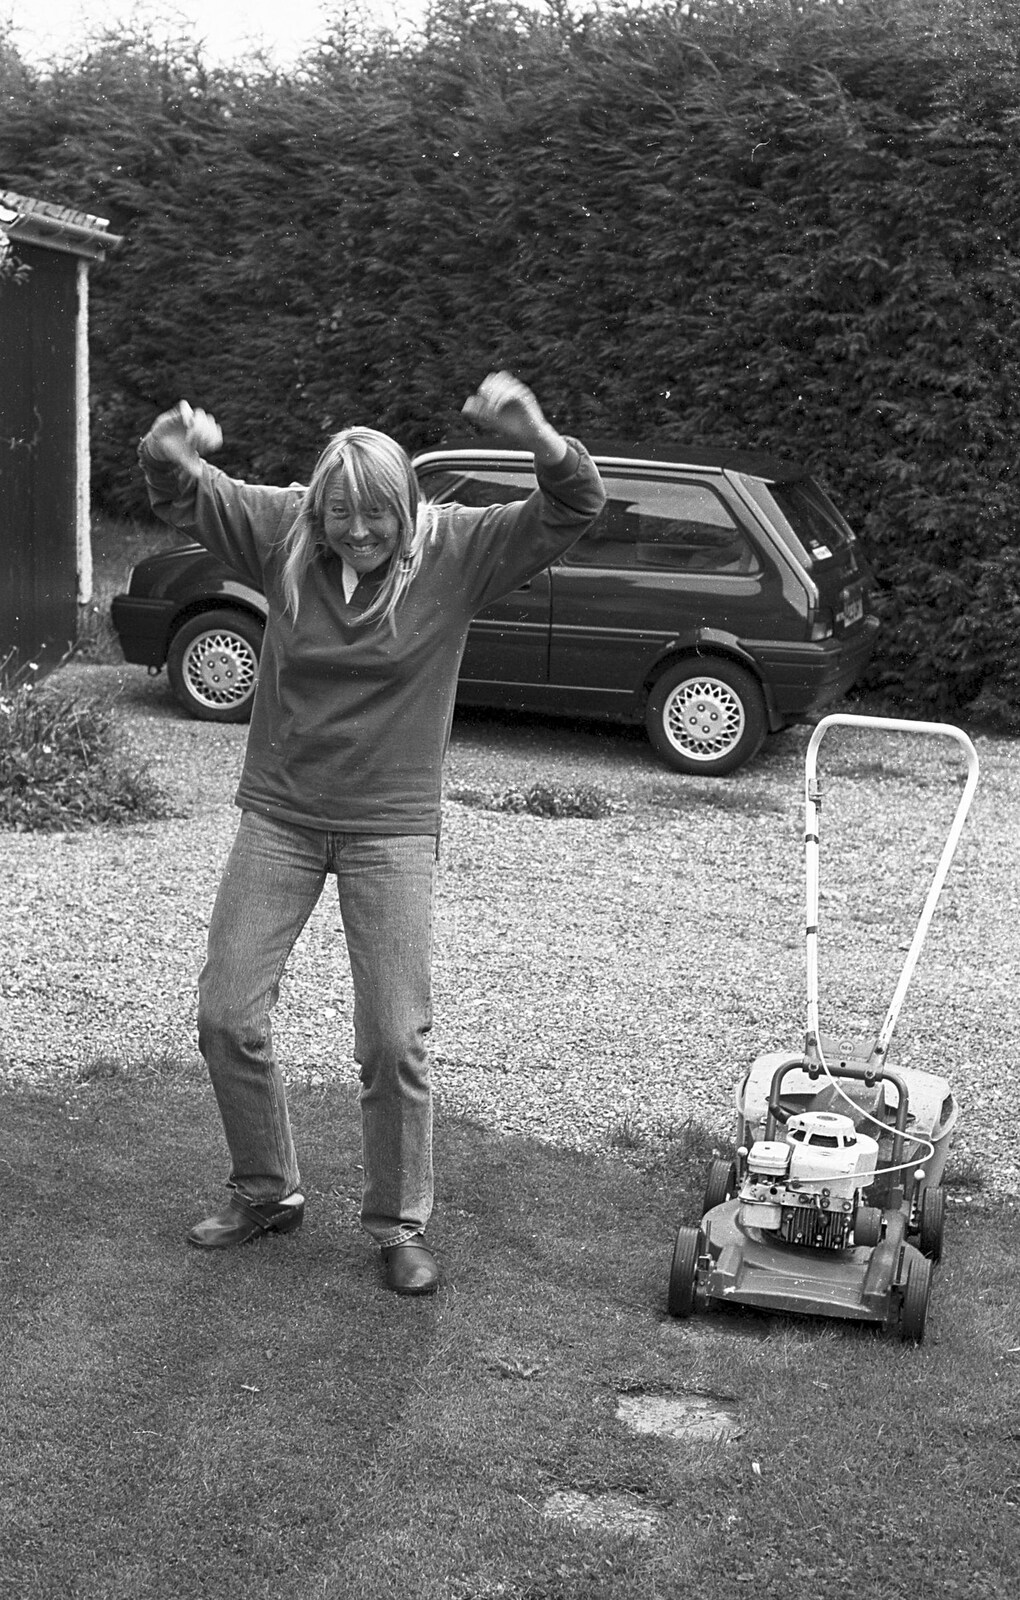 A Black and White Life in Concrete, Stuston, Suffolk - 3rd September 1992: Sue and a lawnmower